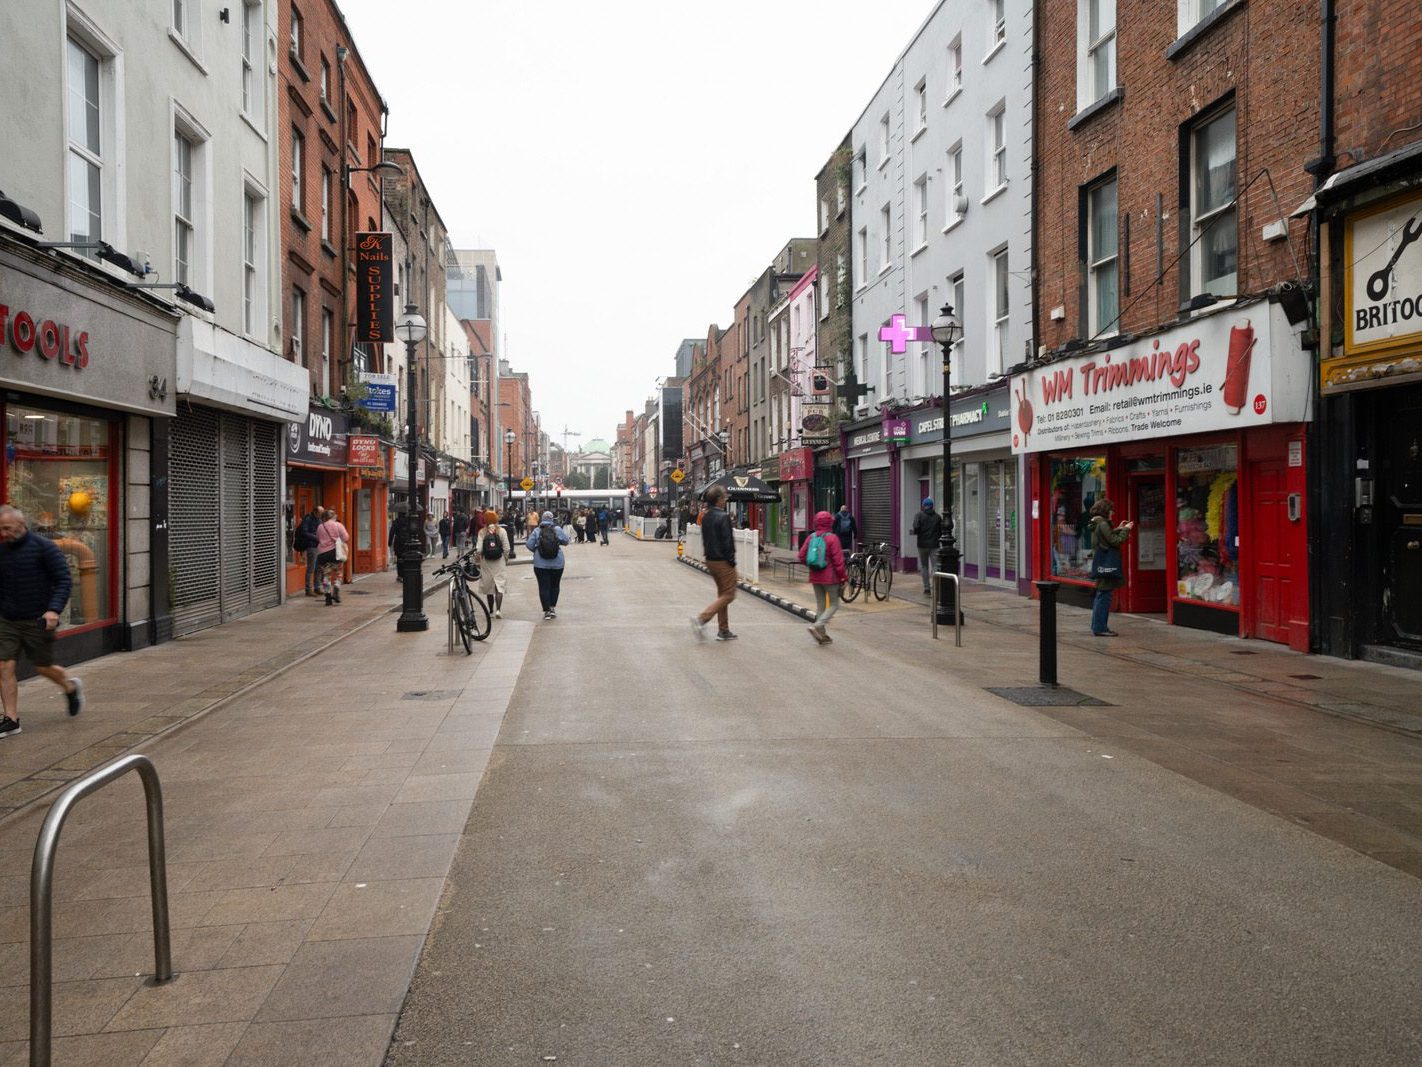 CAPEL STREET ON A DULL WET DAY [INTERIM CAPEL STREET IMPROVEMENT WORKS ARE NOW ONGOING] 019